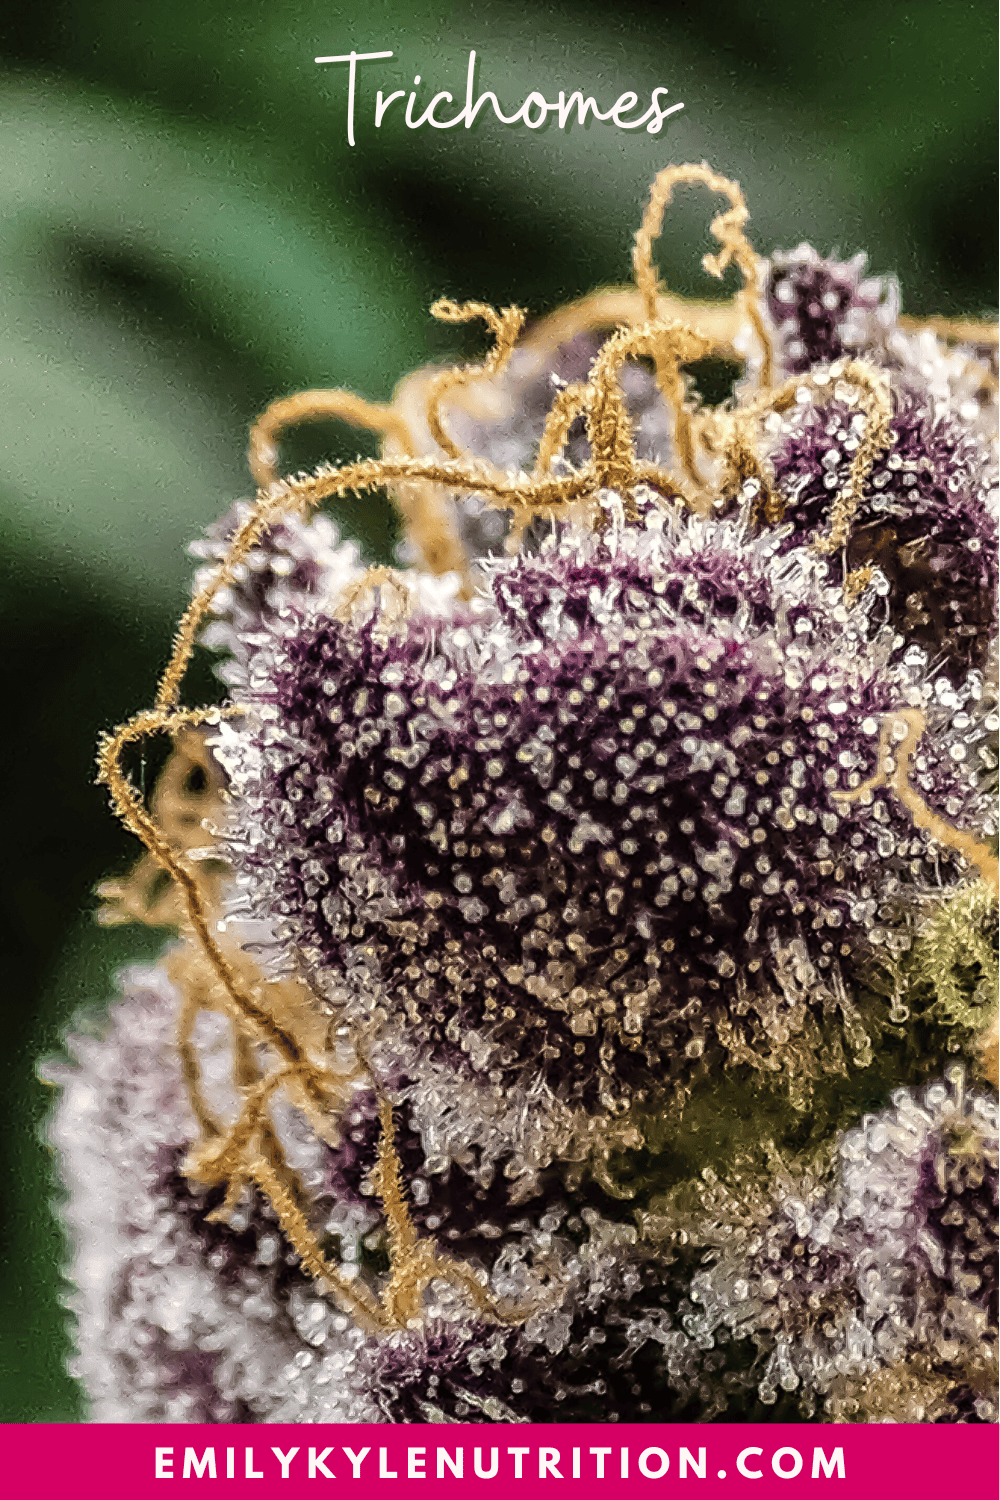 A picture of cannabis trichomes.